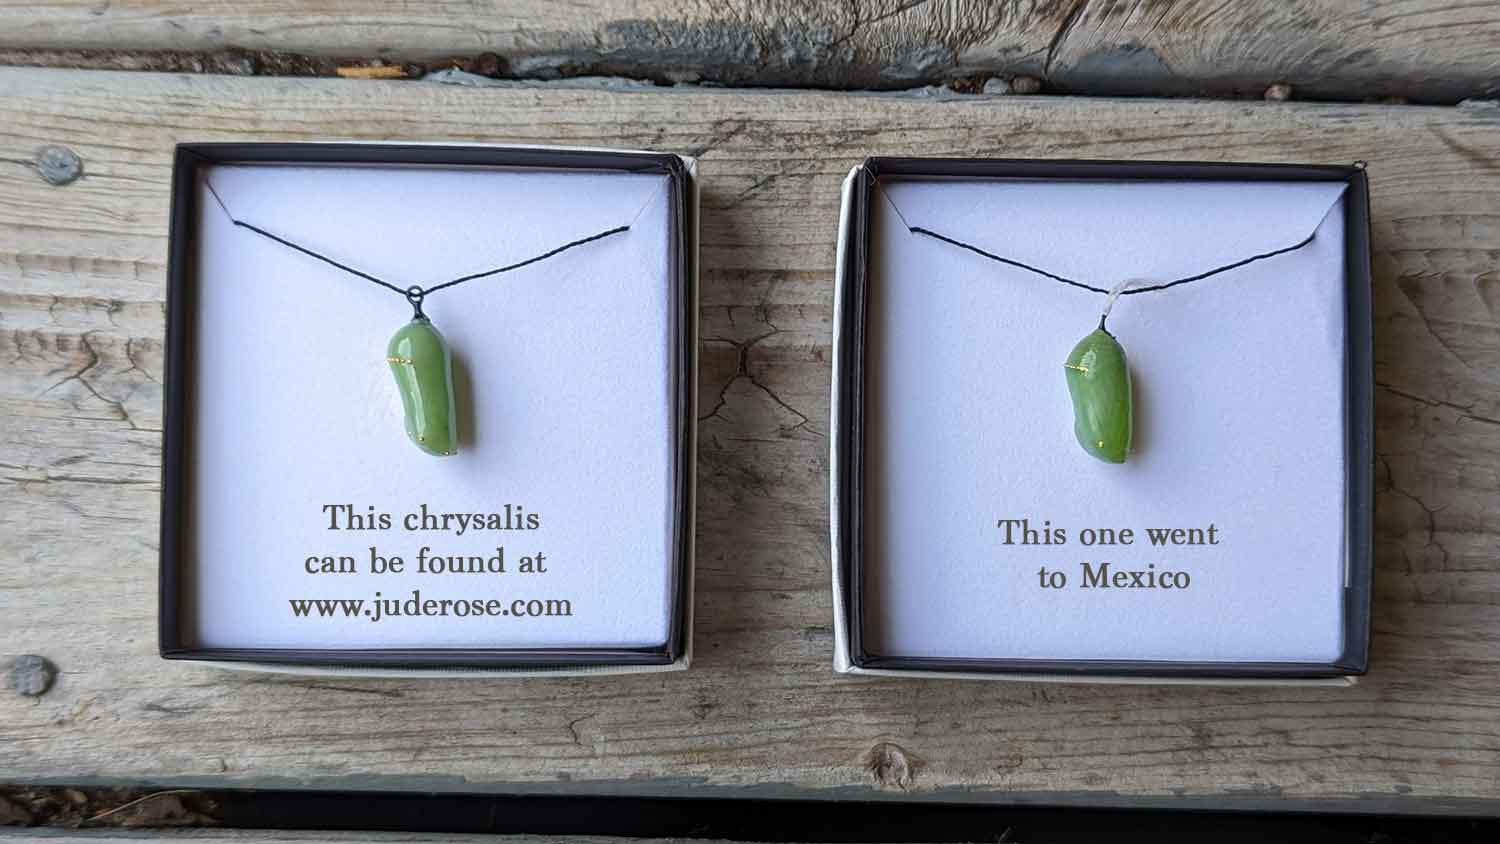 Glass and 24k gold chrysalis replica next to a real Monarch chrysalis, both in jewelry boxes